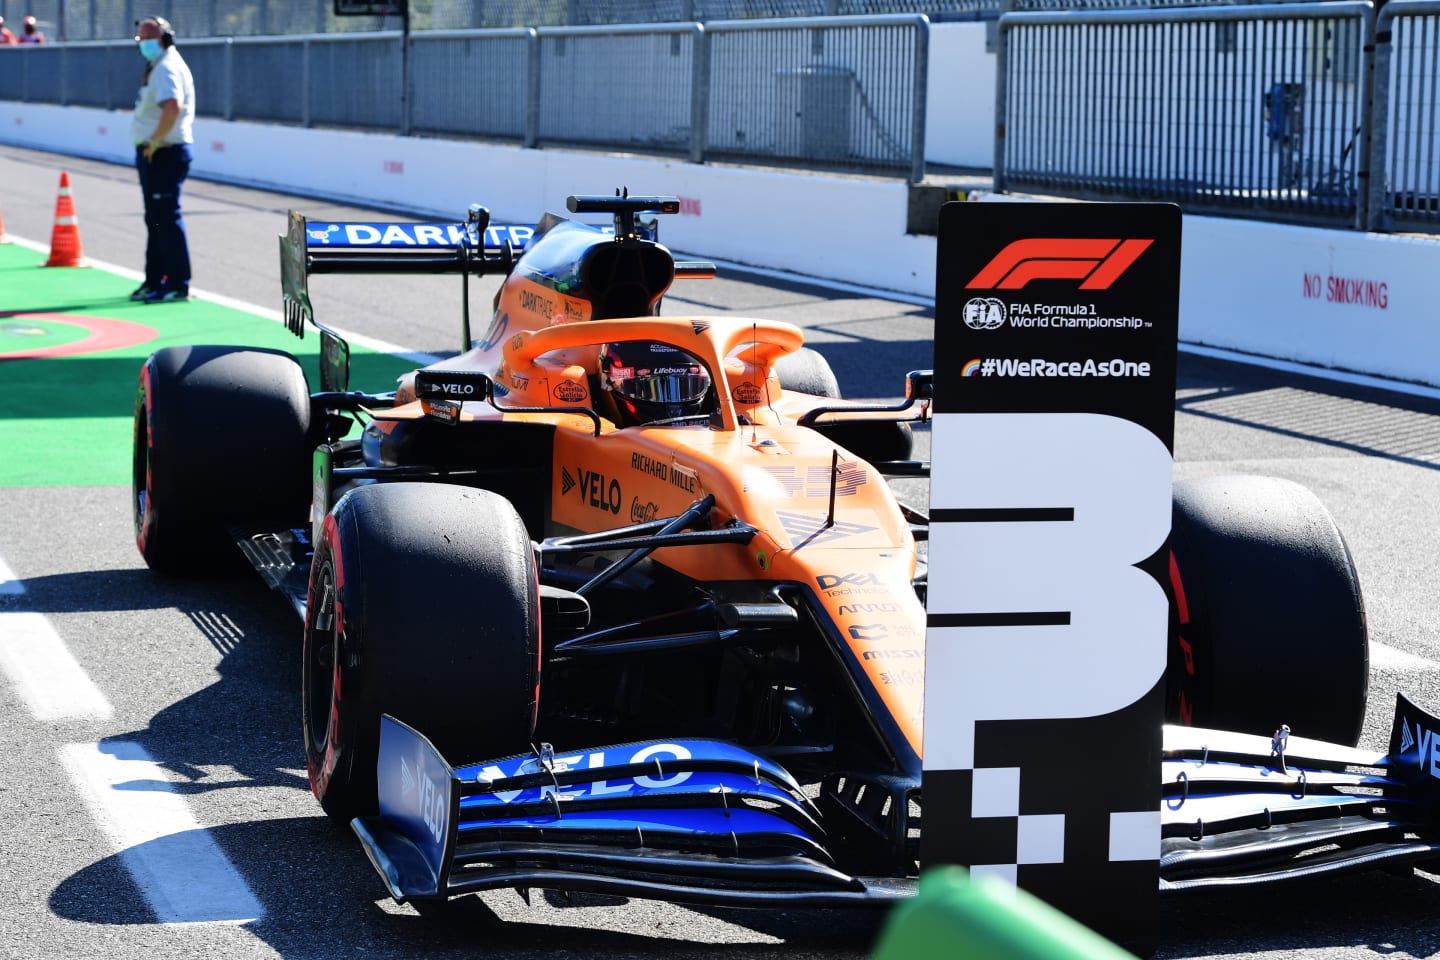 MONZA, ITALY - SEPTEMBER 05: Third placed qualifier Carlos Sainz of Spain driving the (55) McLaren F1 Team MCL35 Renault stops in parc ferme after qualifying for the F1 Grand Prix of Italy at Autodromo di Monza on September 05, 2020 in Monza, Italy. (Photo by Jenifer Lorenzini - Pool/Getty Images)